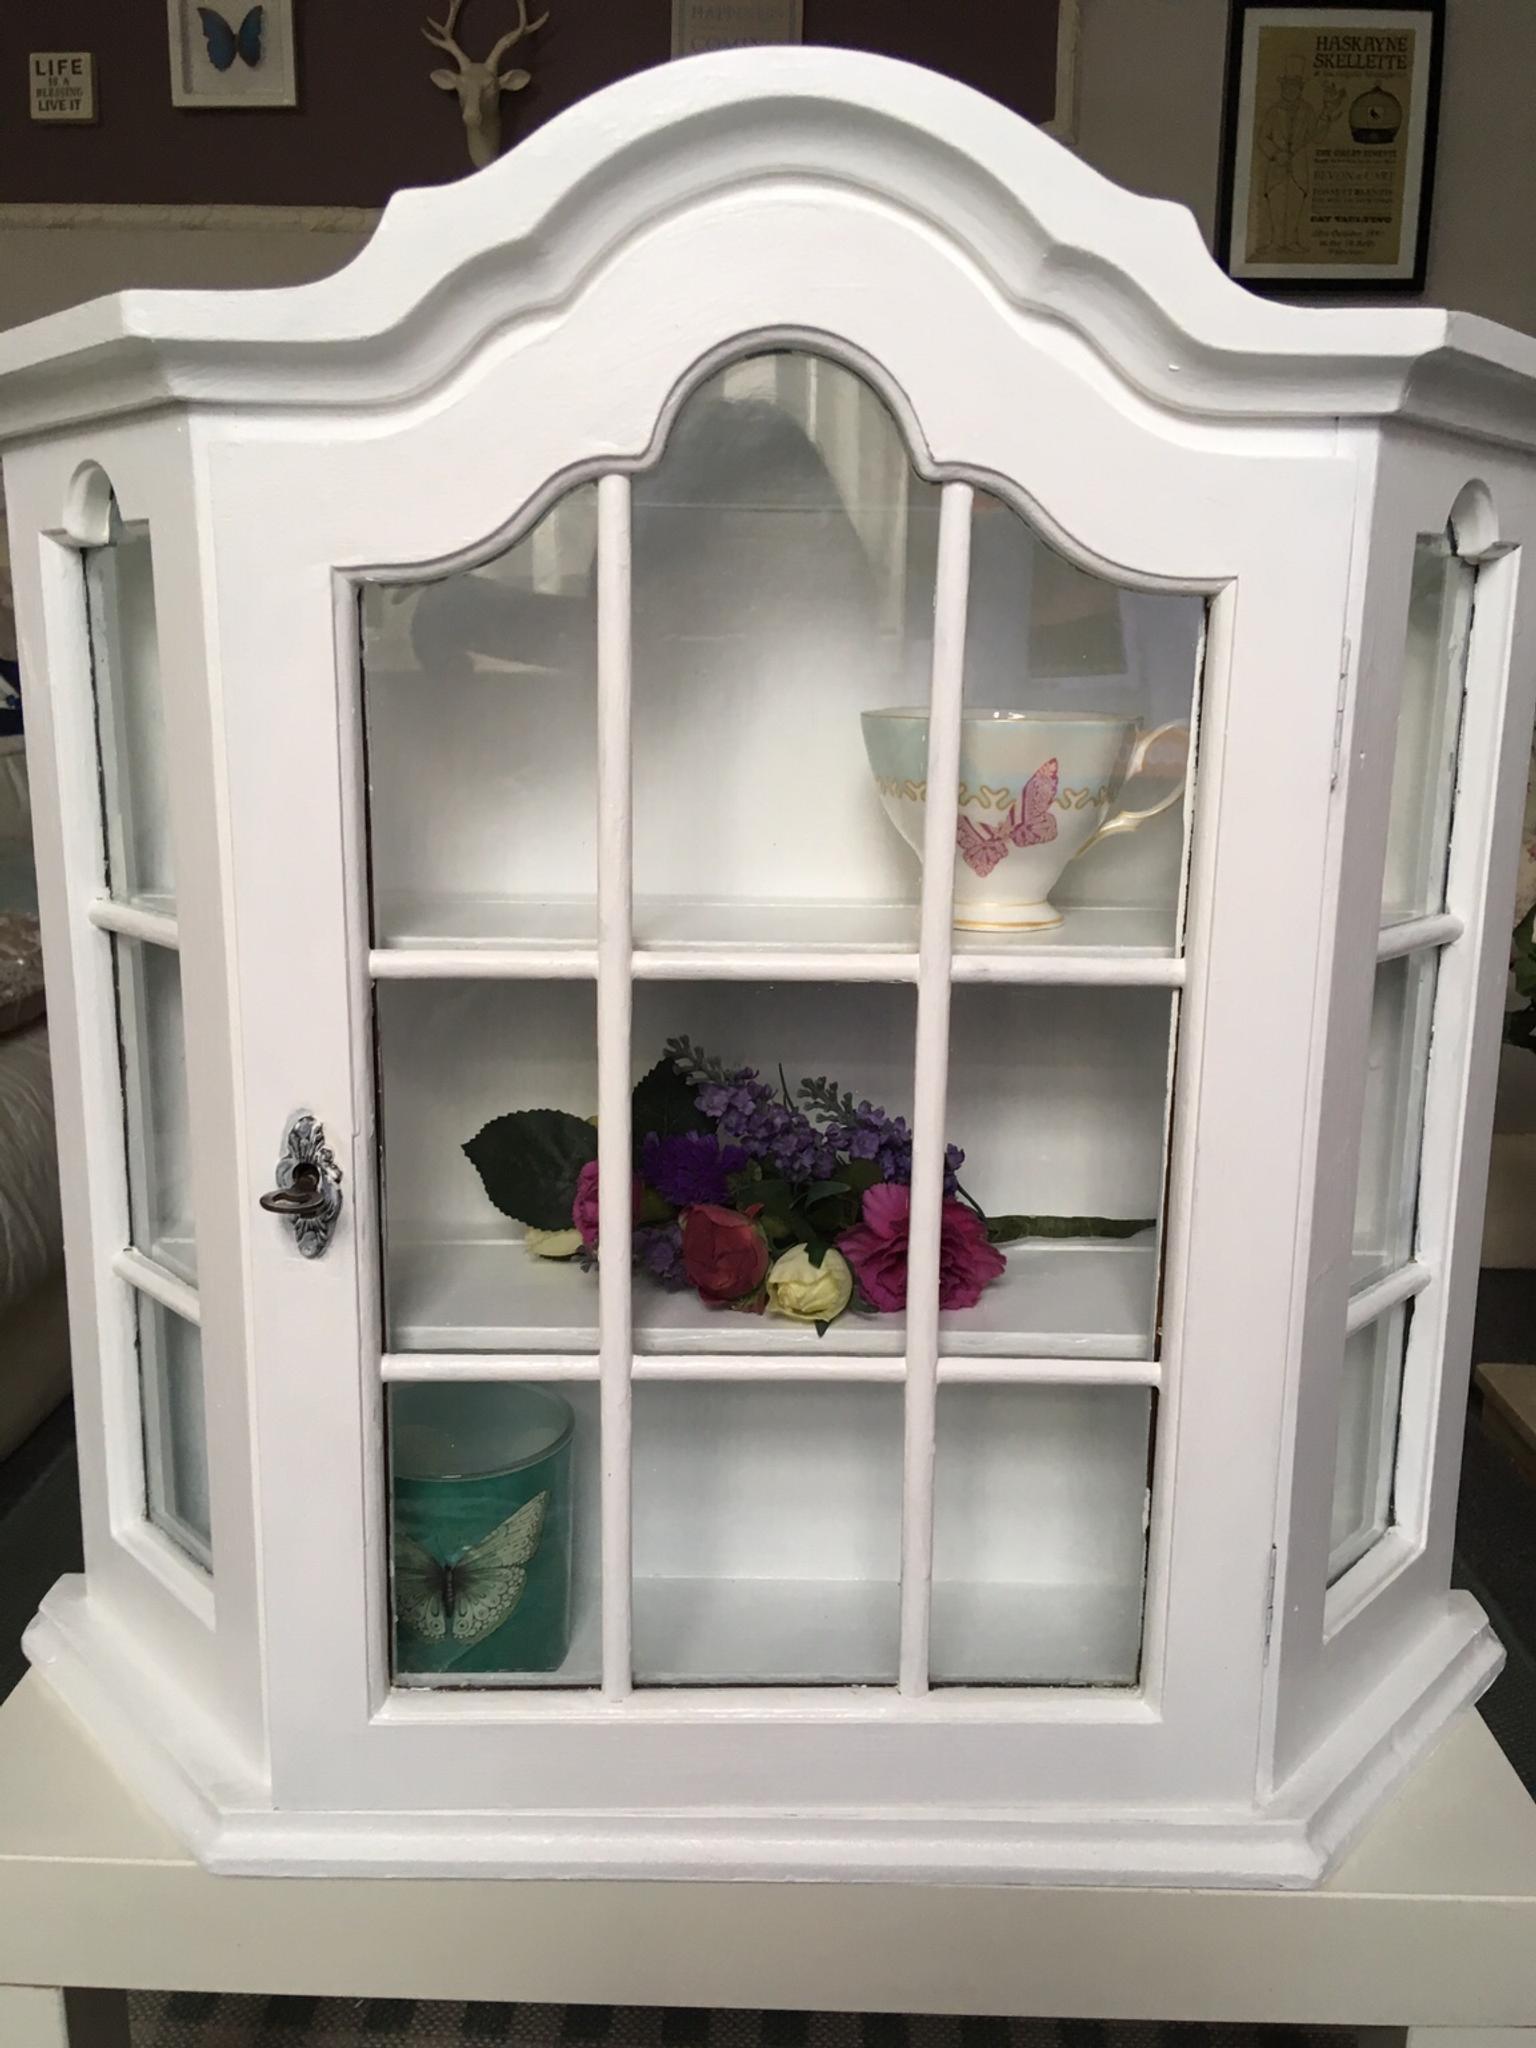 Shabby Chic Small Display Cabinet In Ls12 Leeds For 25 00 For